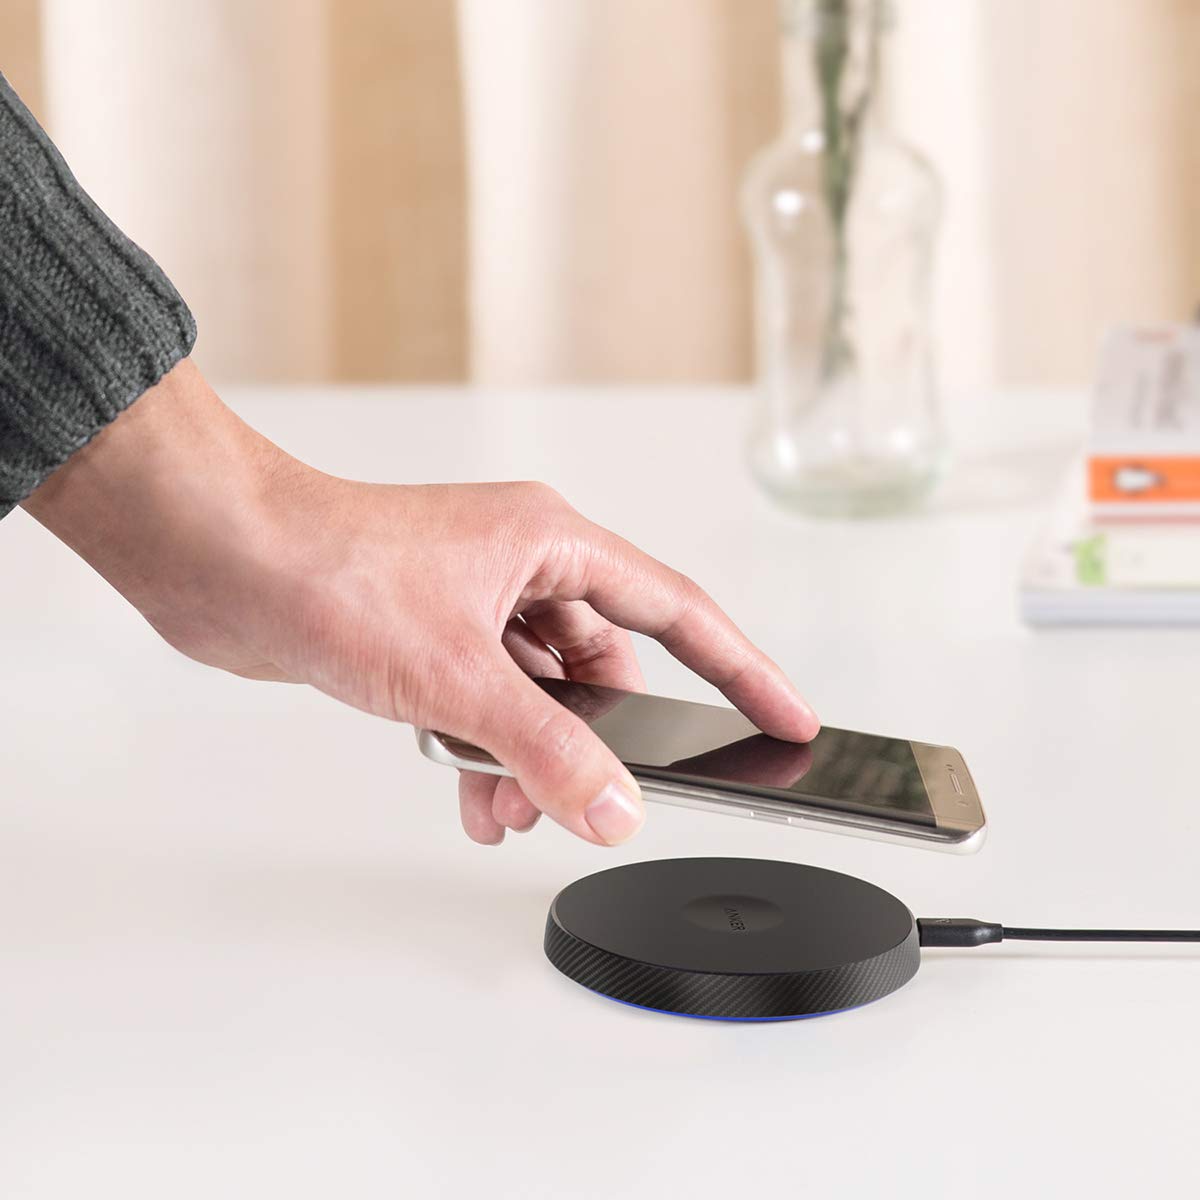 Keep your new smartphone powered up with Anker's Qi Wireless Charging Pad